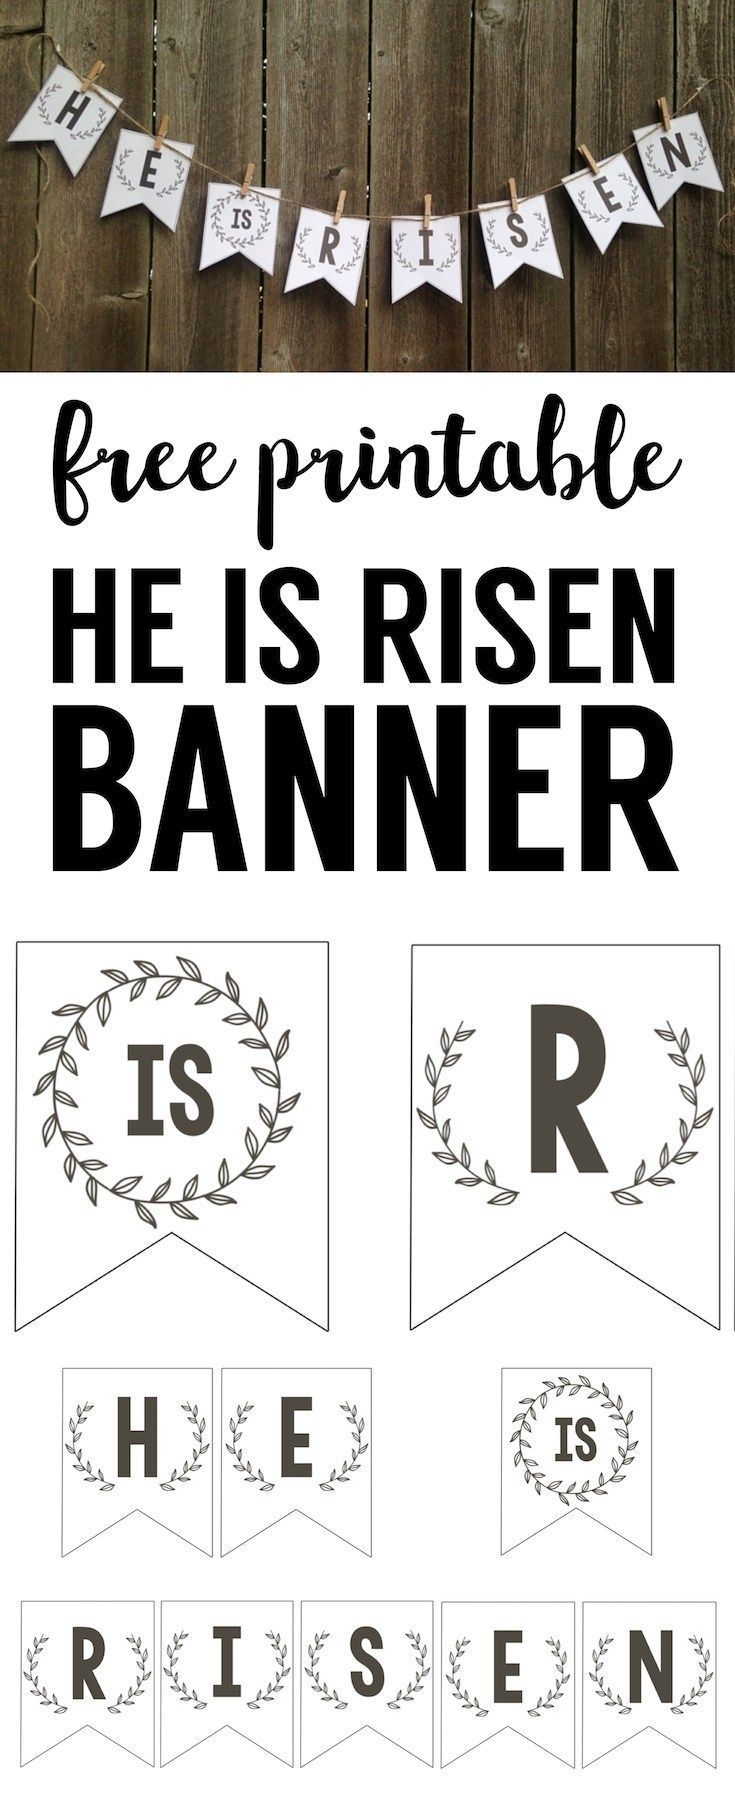 He Is Risen Banner Free Printable Easter Banner Paper Trail Design Free Printable Easter Banner Easter Printables Free Diy Easter Decorations